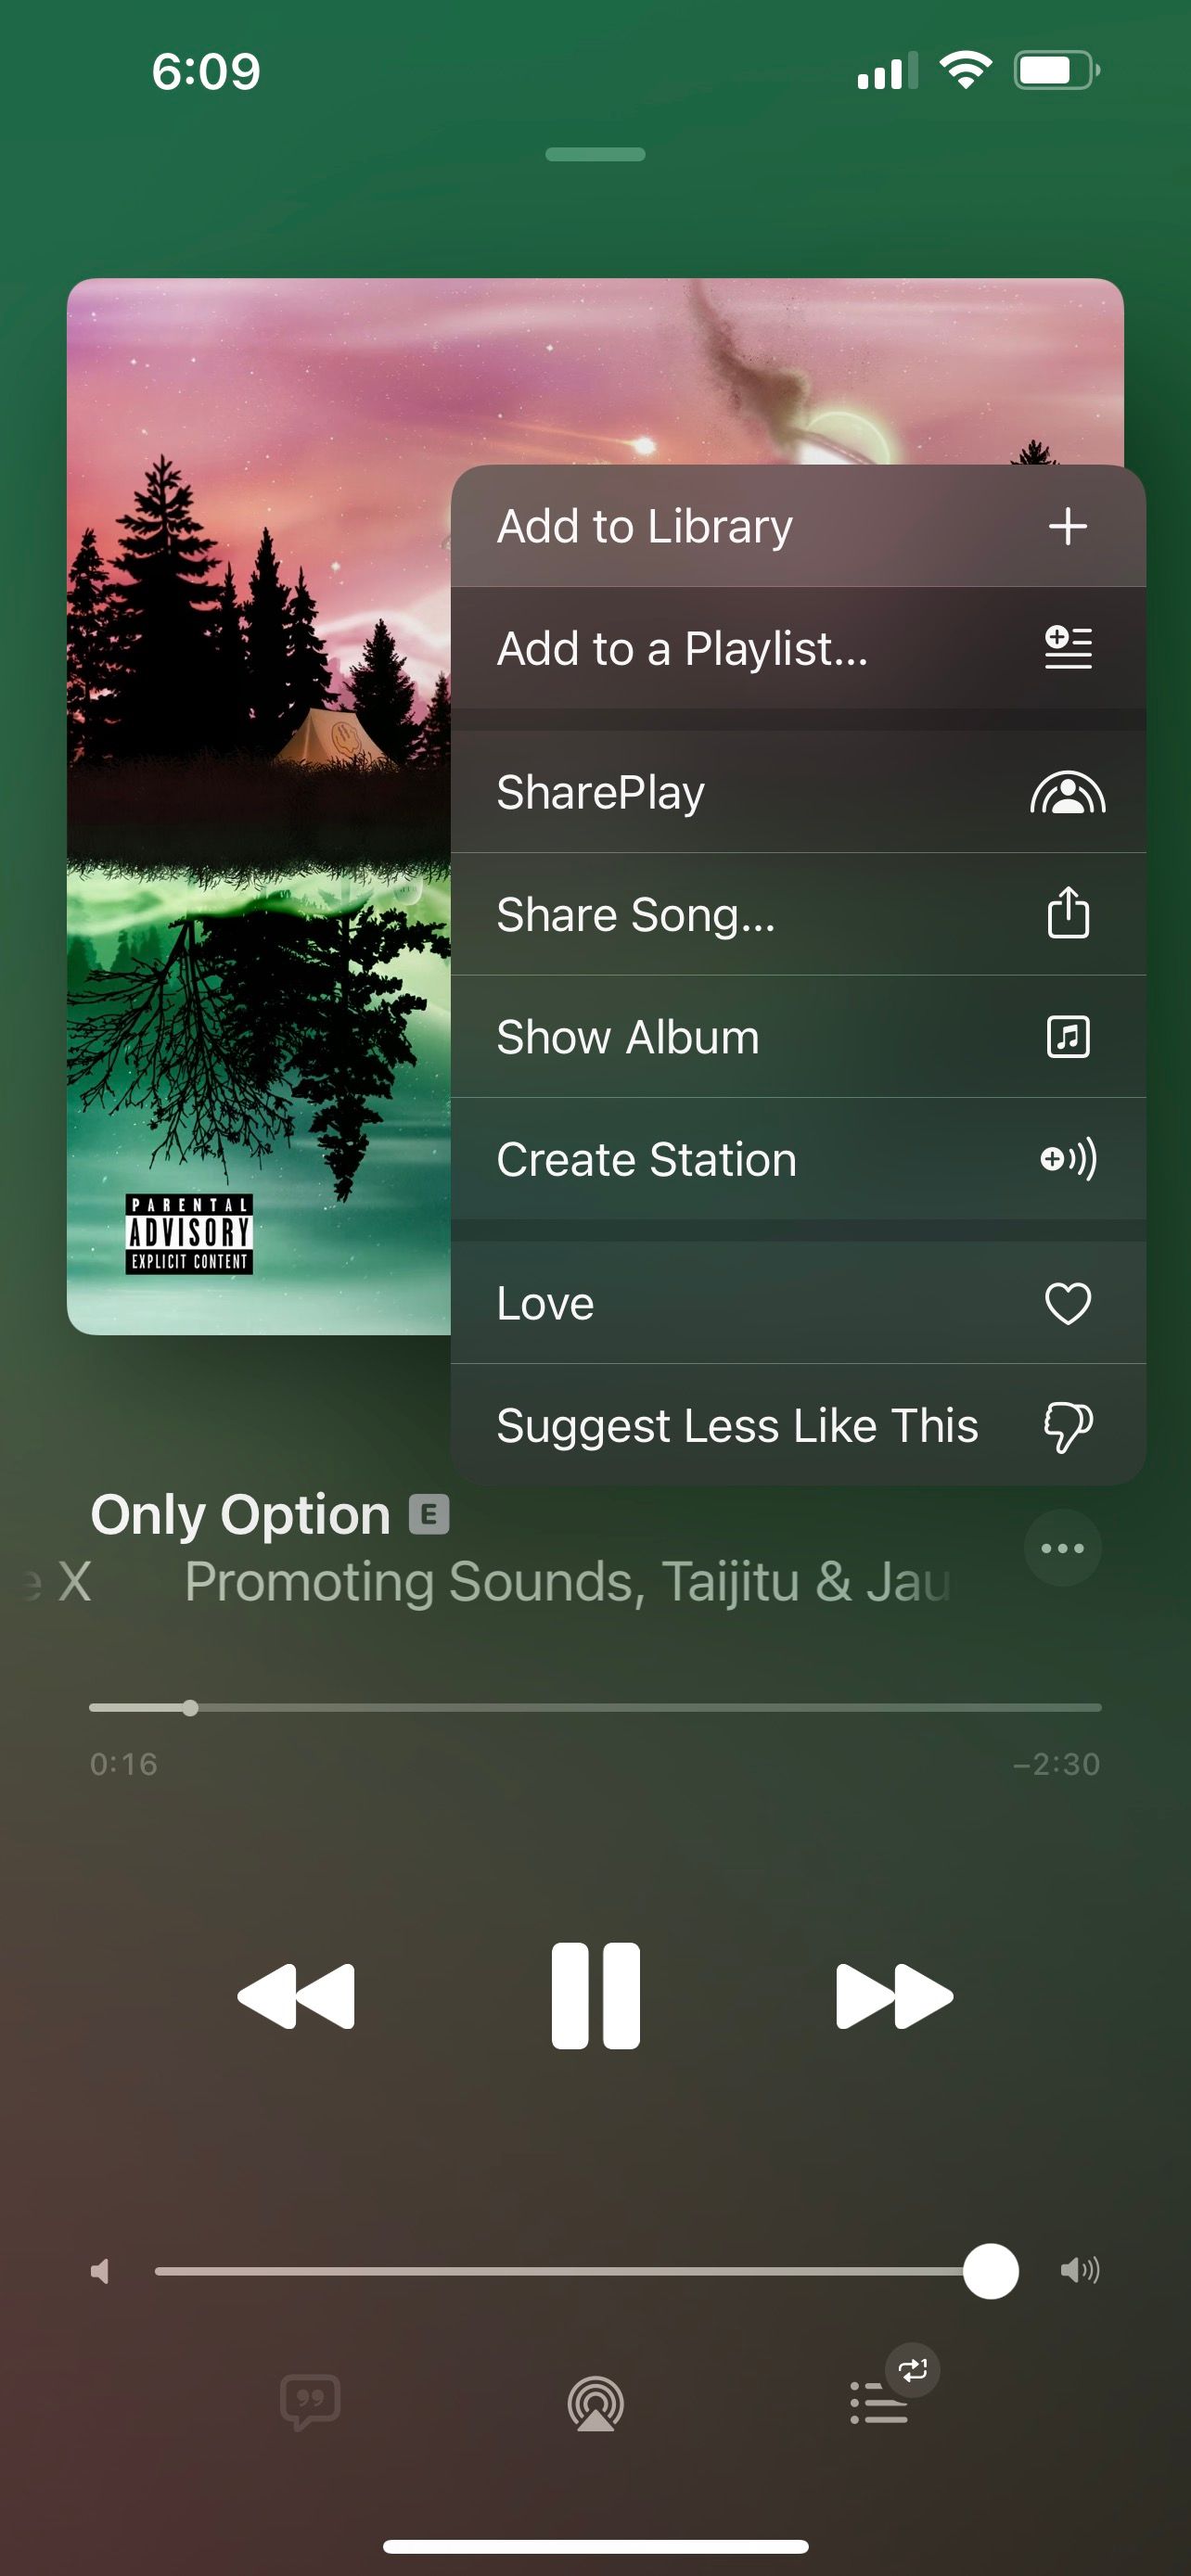 7 Apple Music Features You Probably Don't Know About